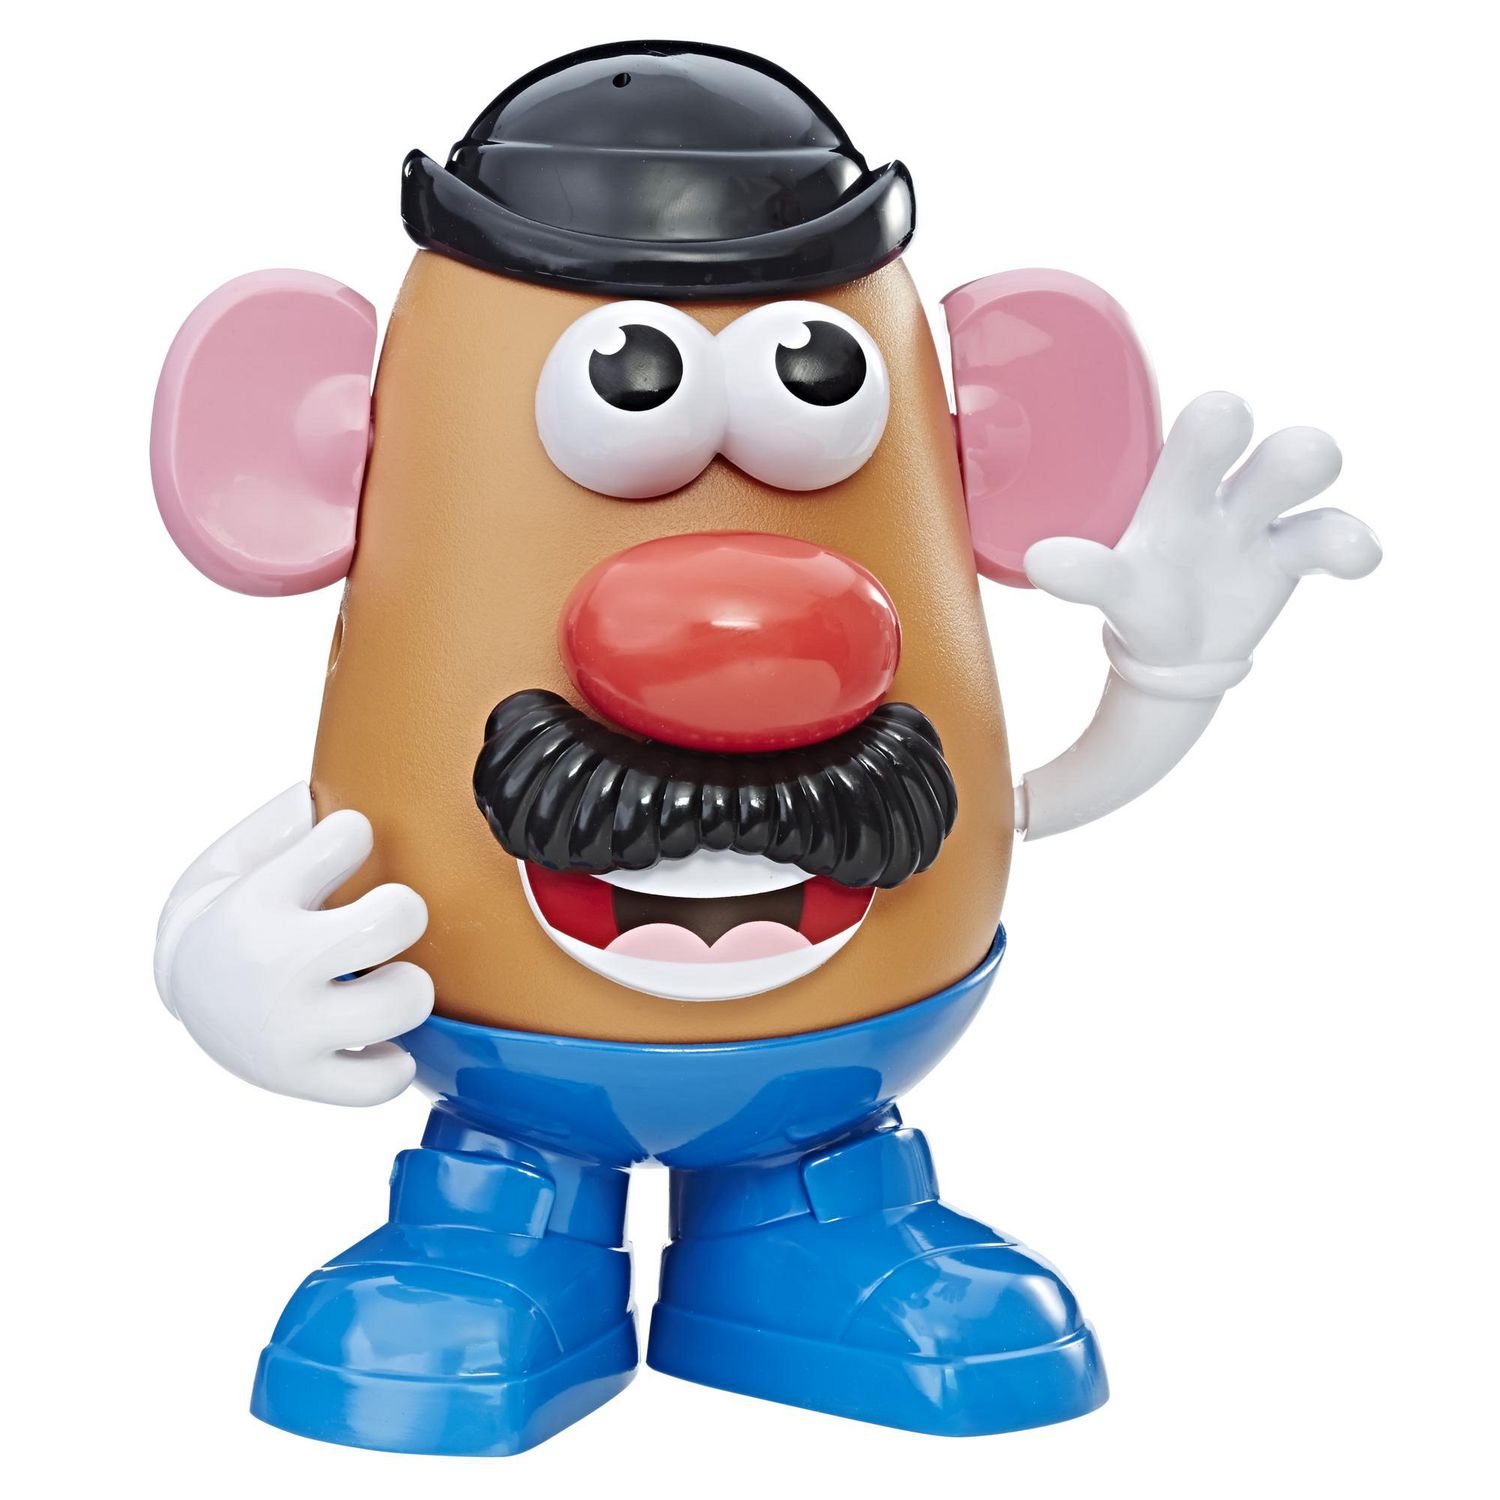 Potato Head Mr. Potato Head Classic Toy For Kids Ages 2 and Up, Includes 13  Parts and Pieces to Create Funny Faces | Walmart Canada